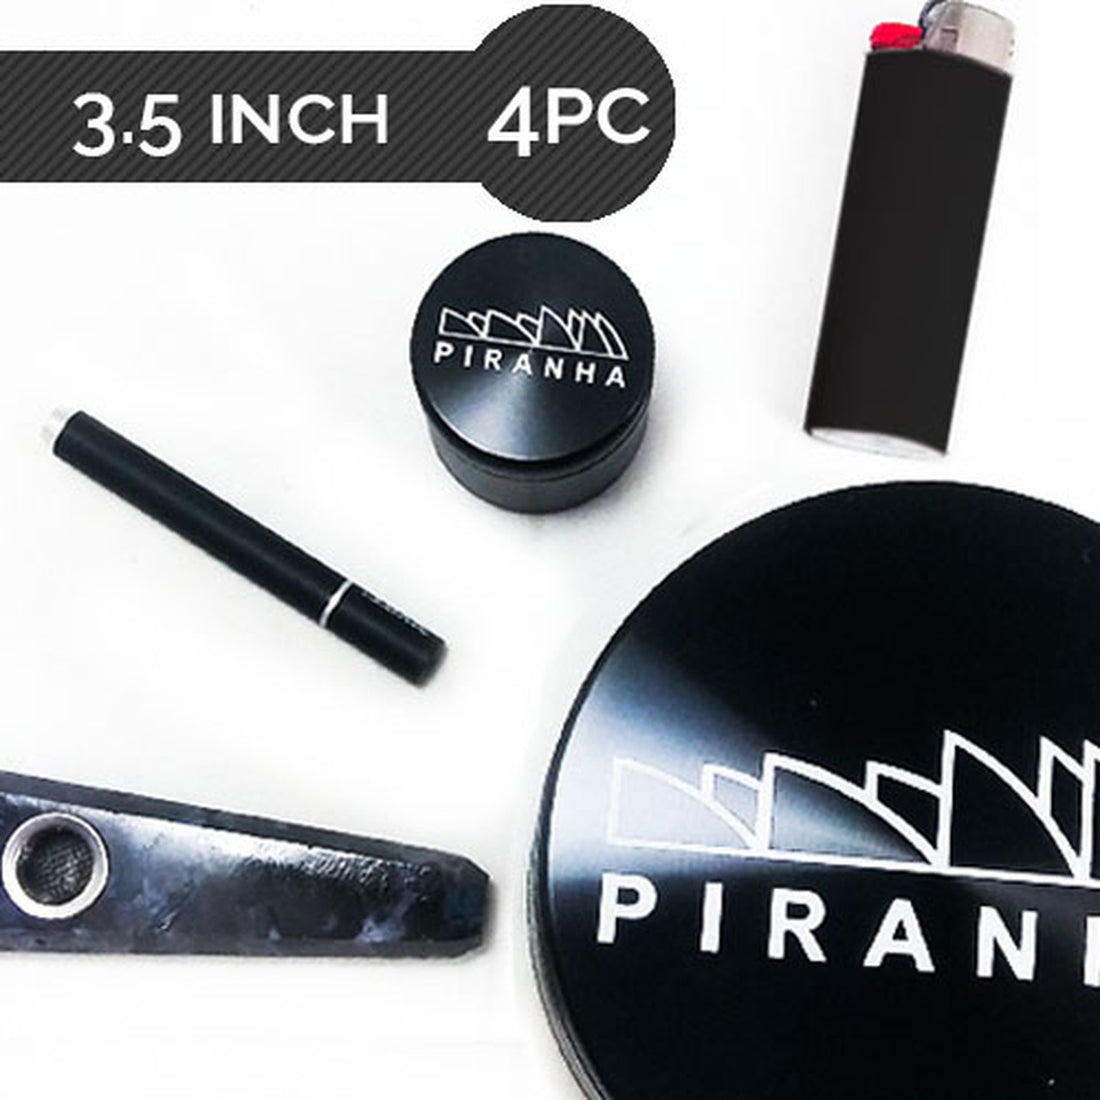 PRODUCT REVIEW: Piranha Grinders